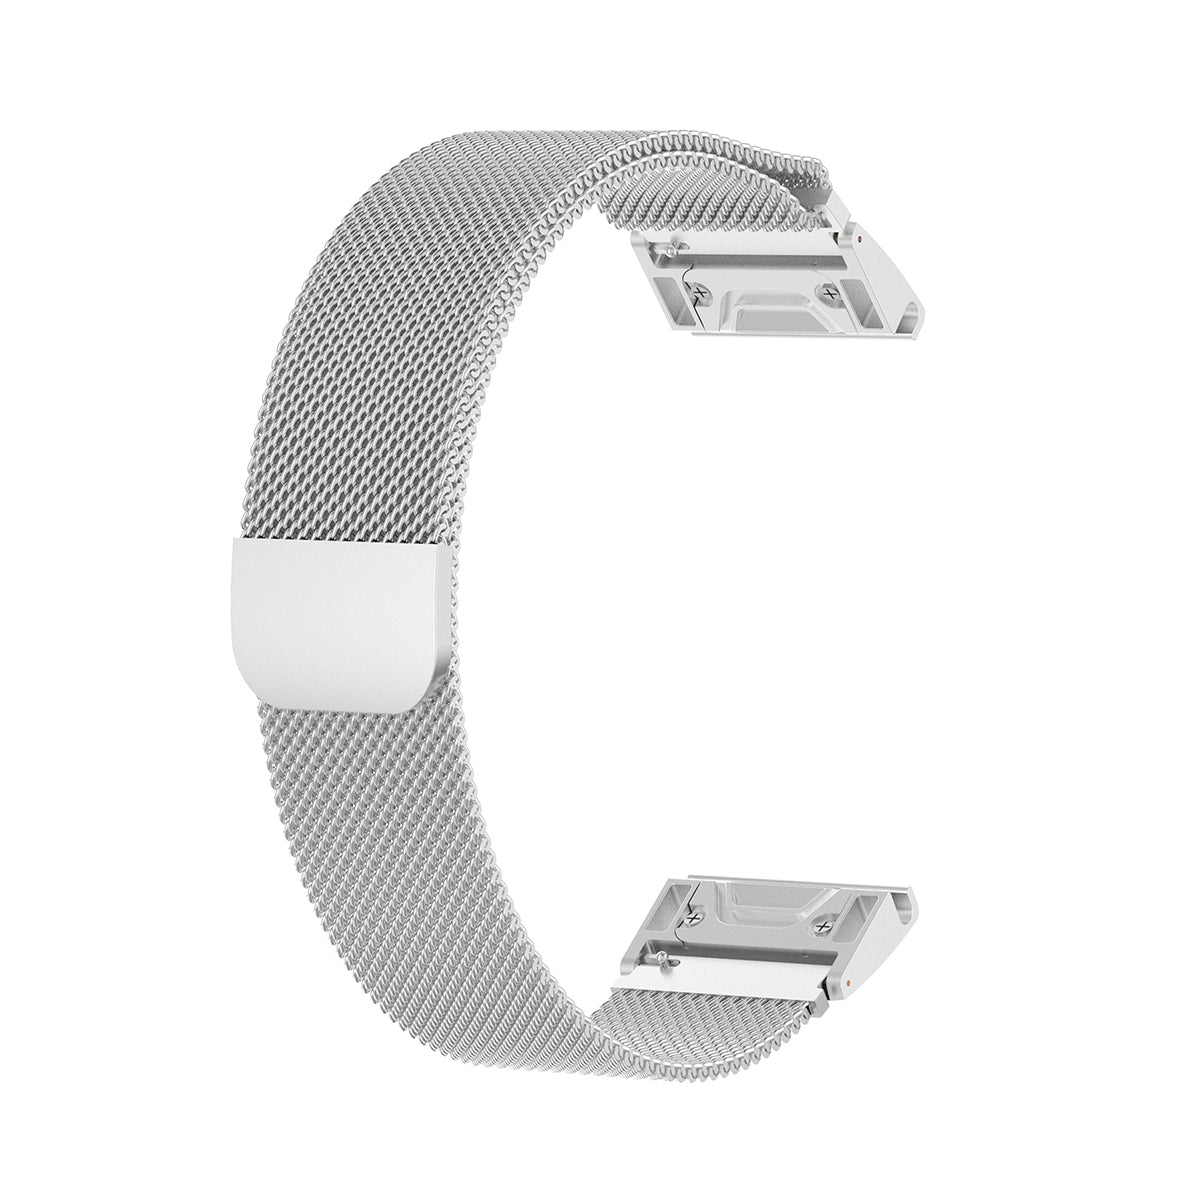 Milanese Garmin Fenix 5S Band Magnetic Lock with Quick Change (20mm) Silver Steel  